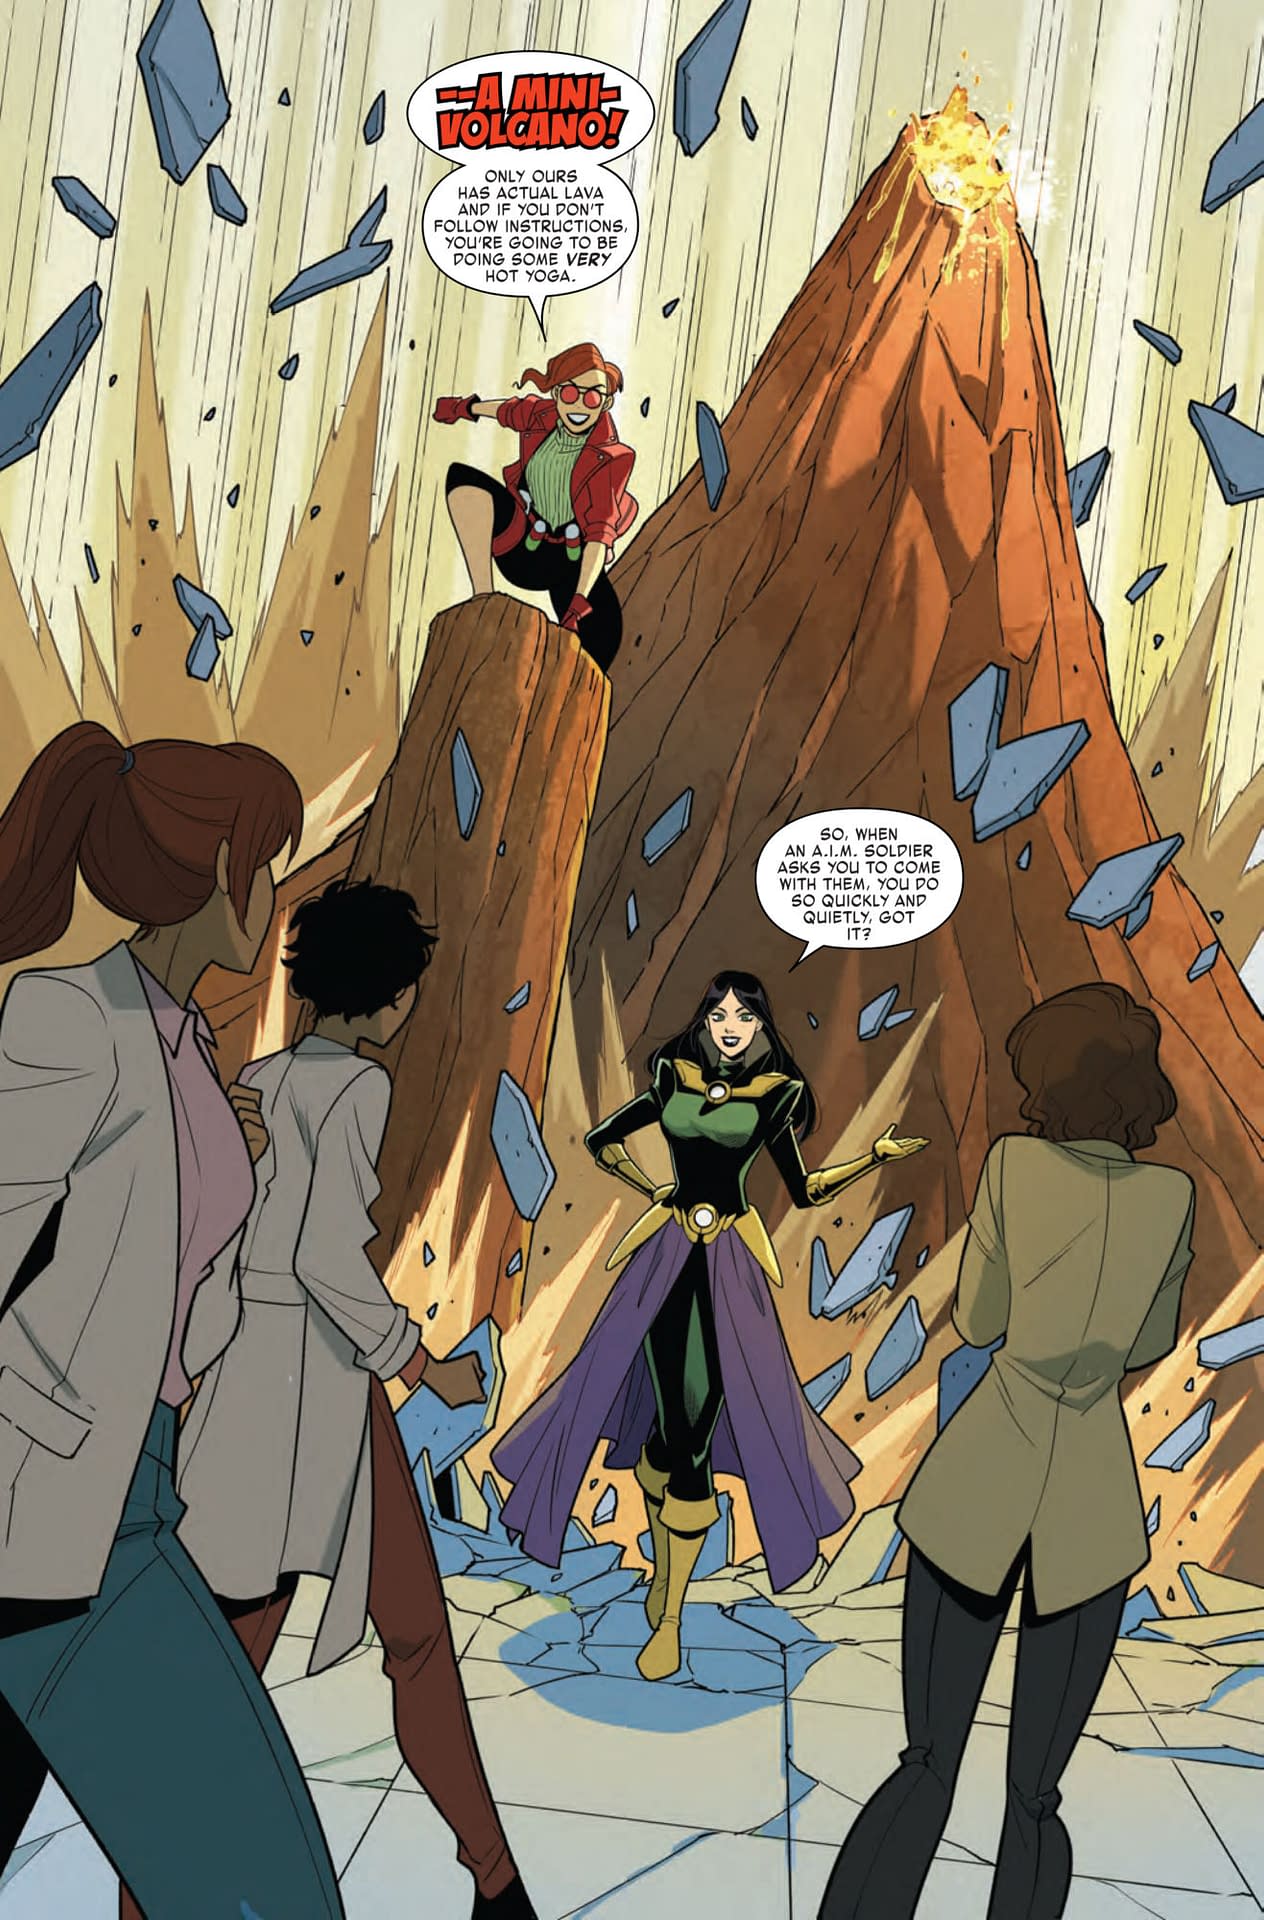 A.I.M. Explores Aggressive Recruitment Techniques in Unstoppable Wasp #9 (Preview)